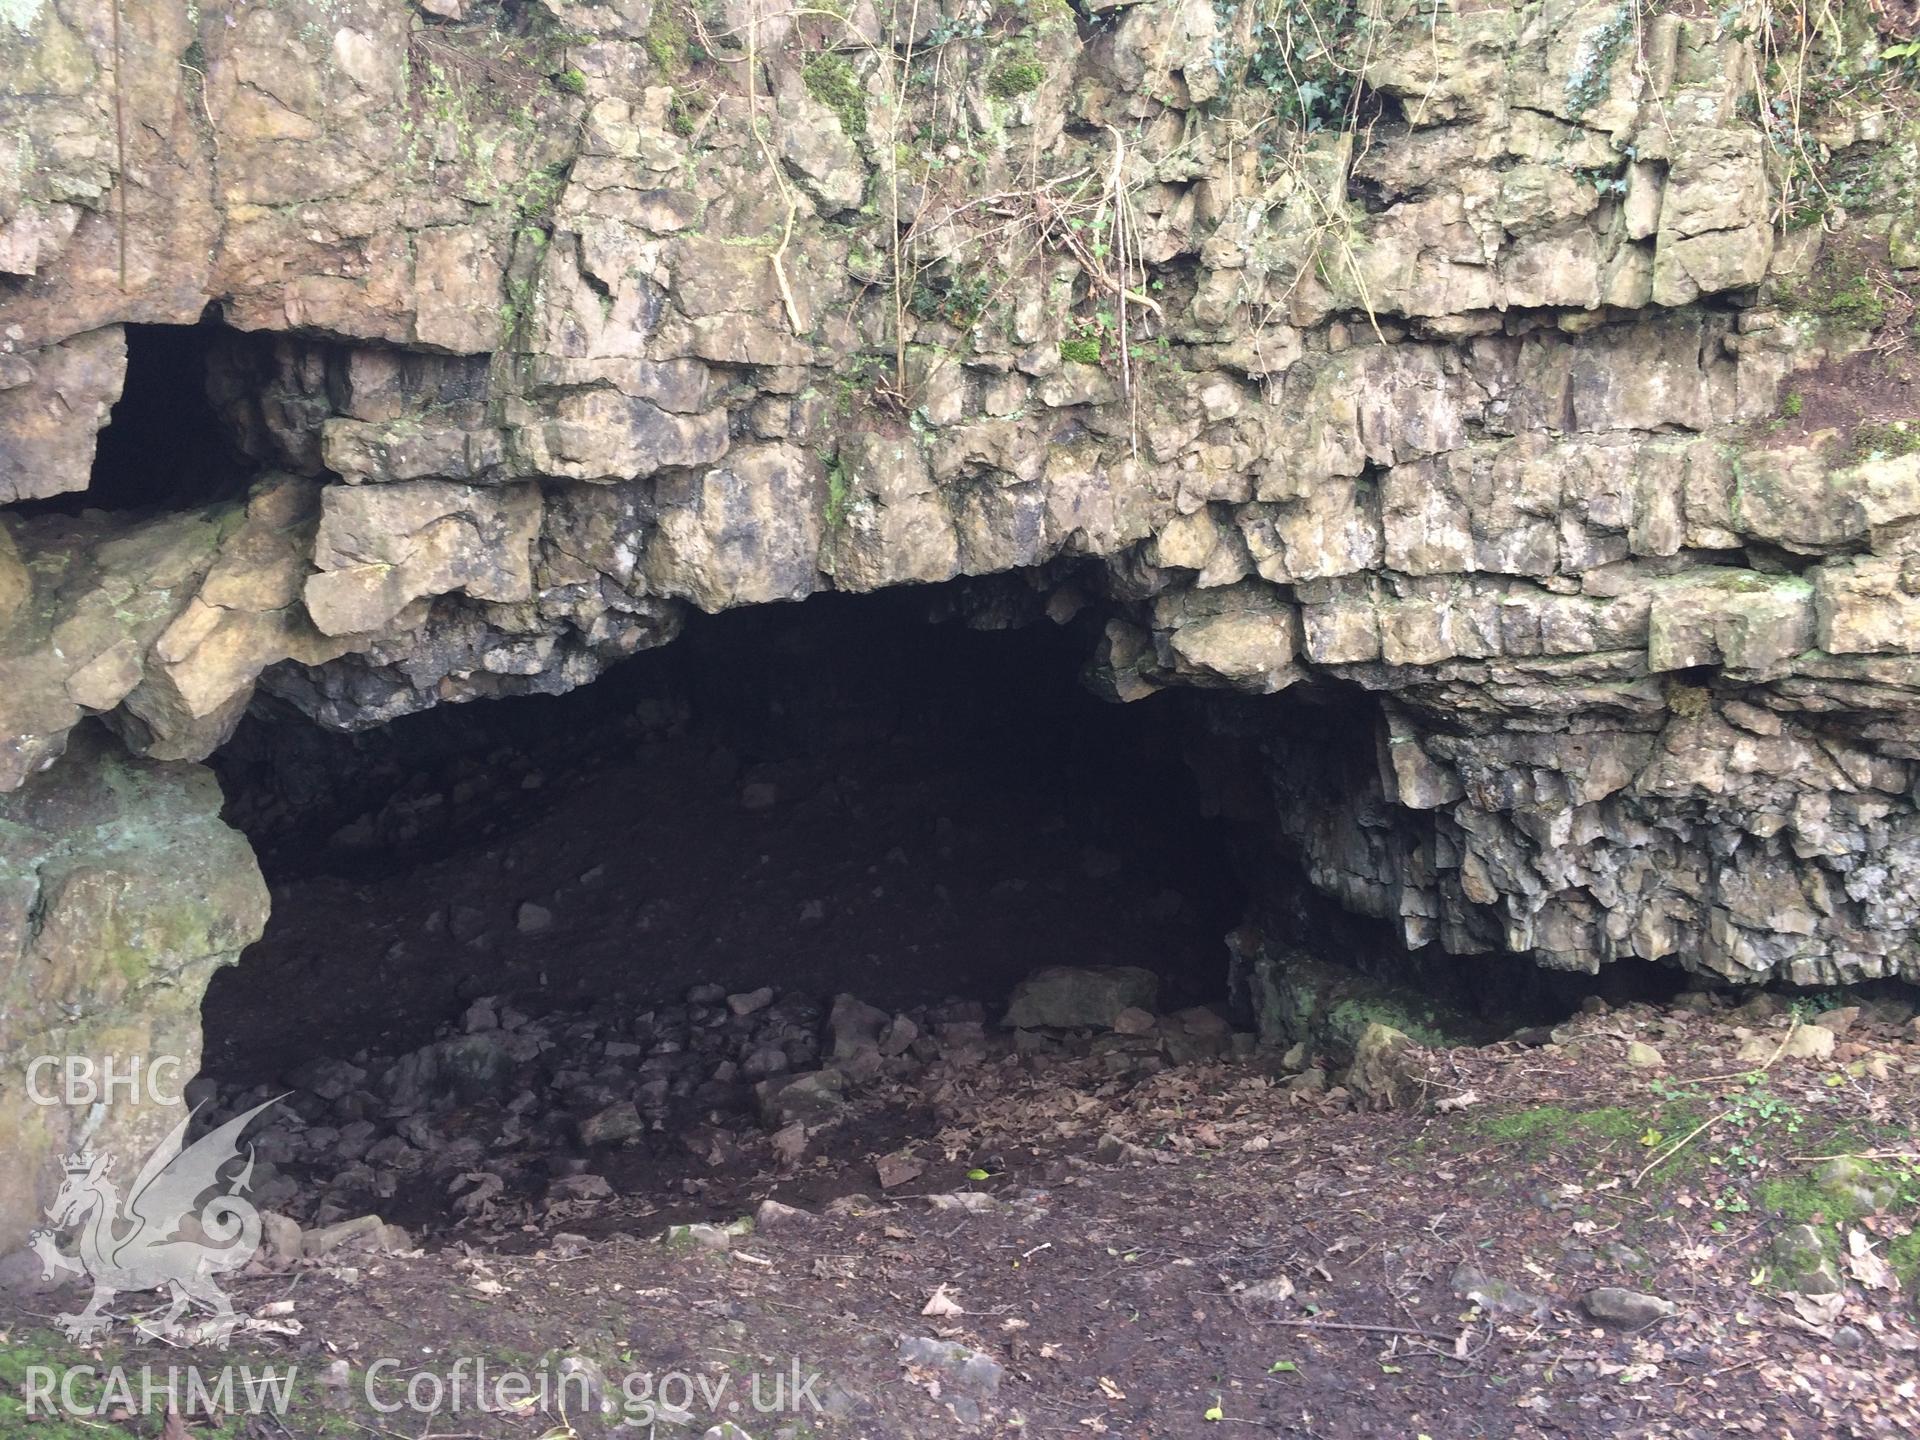 Colour photo showing view of Llanymynech cave taken by Paul R. Davis, 28th February 2018.